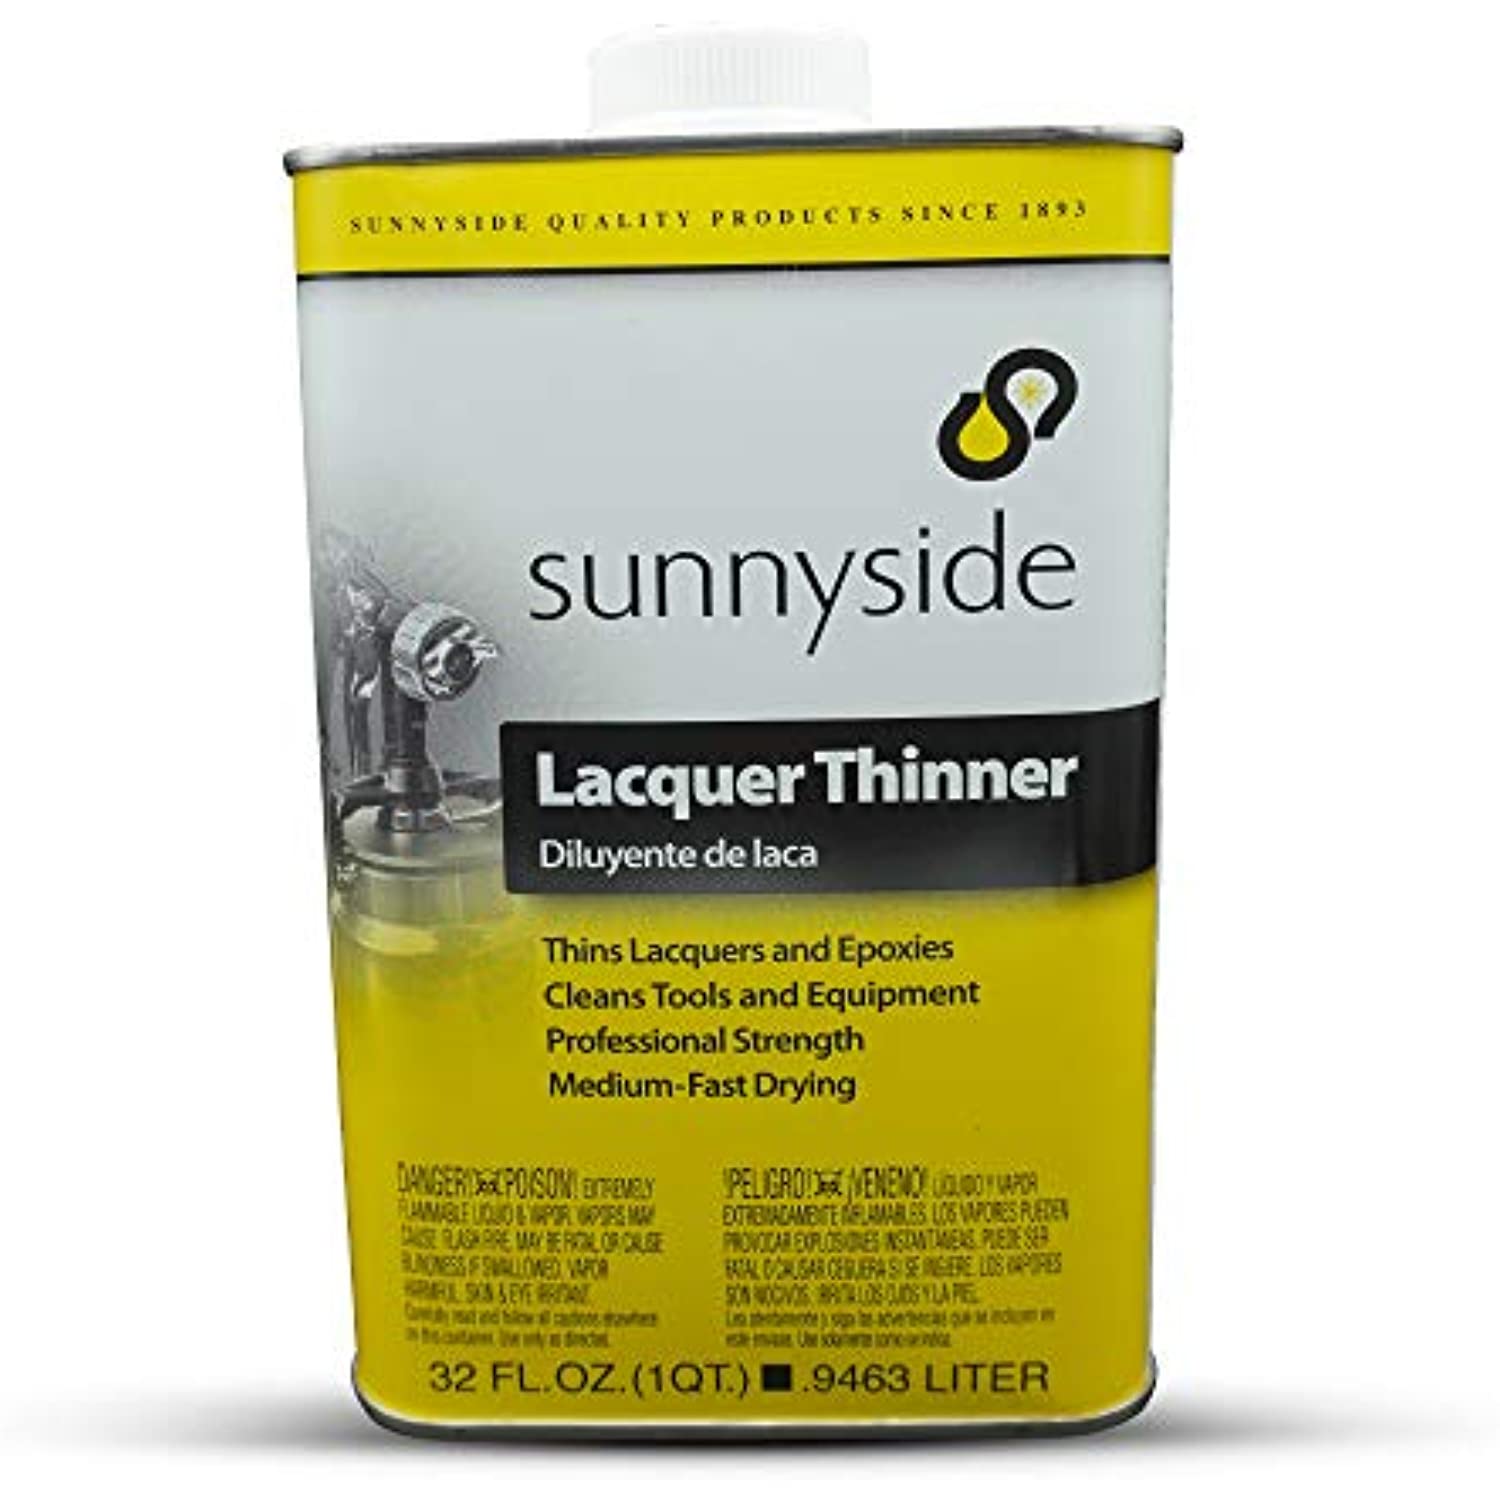 Sunnyside Lacquer Thinner 1 Quart with Centaurus AZ Resistant Glove Dissolves Resins Superior Cleaner Tools Machine Engines Removes Tar Strong Adhesives Shine Removal Grease Oil Flammable